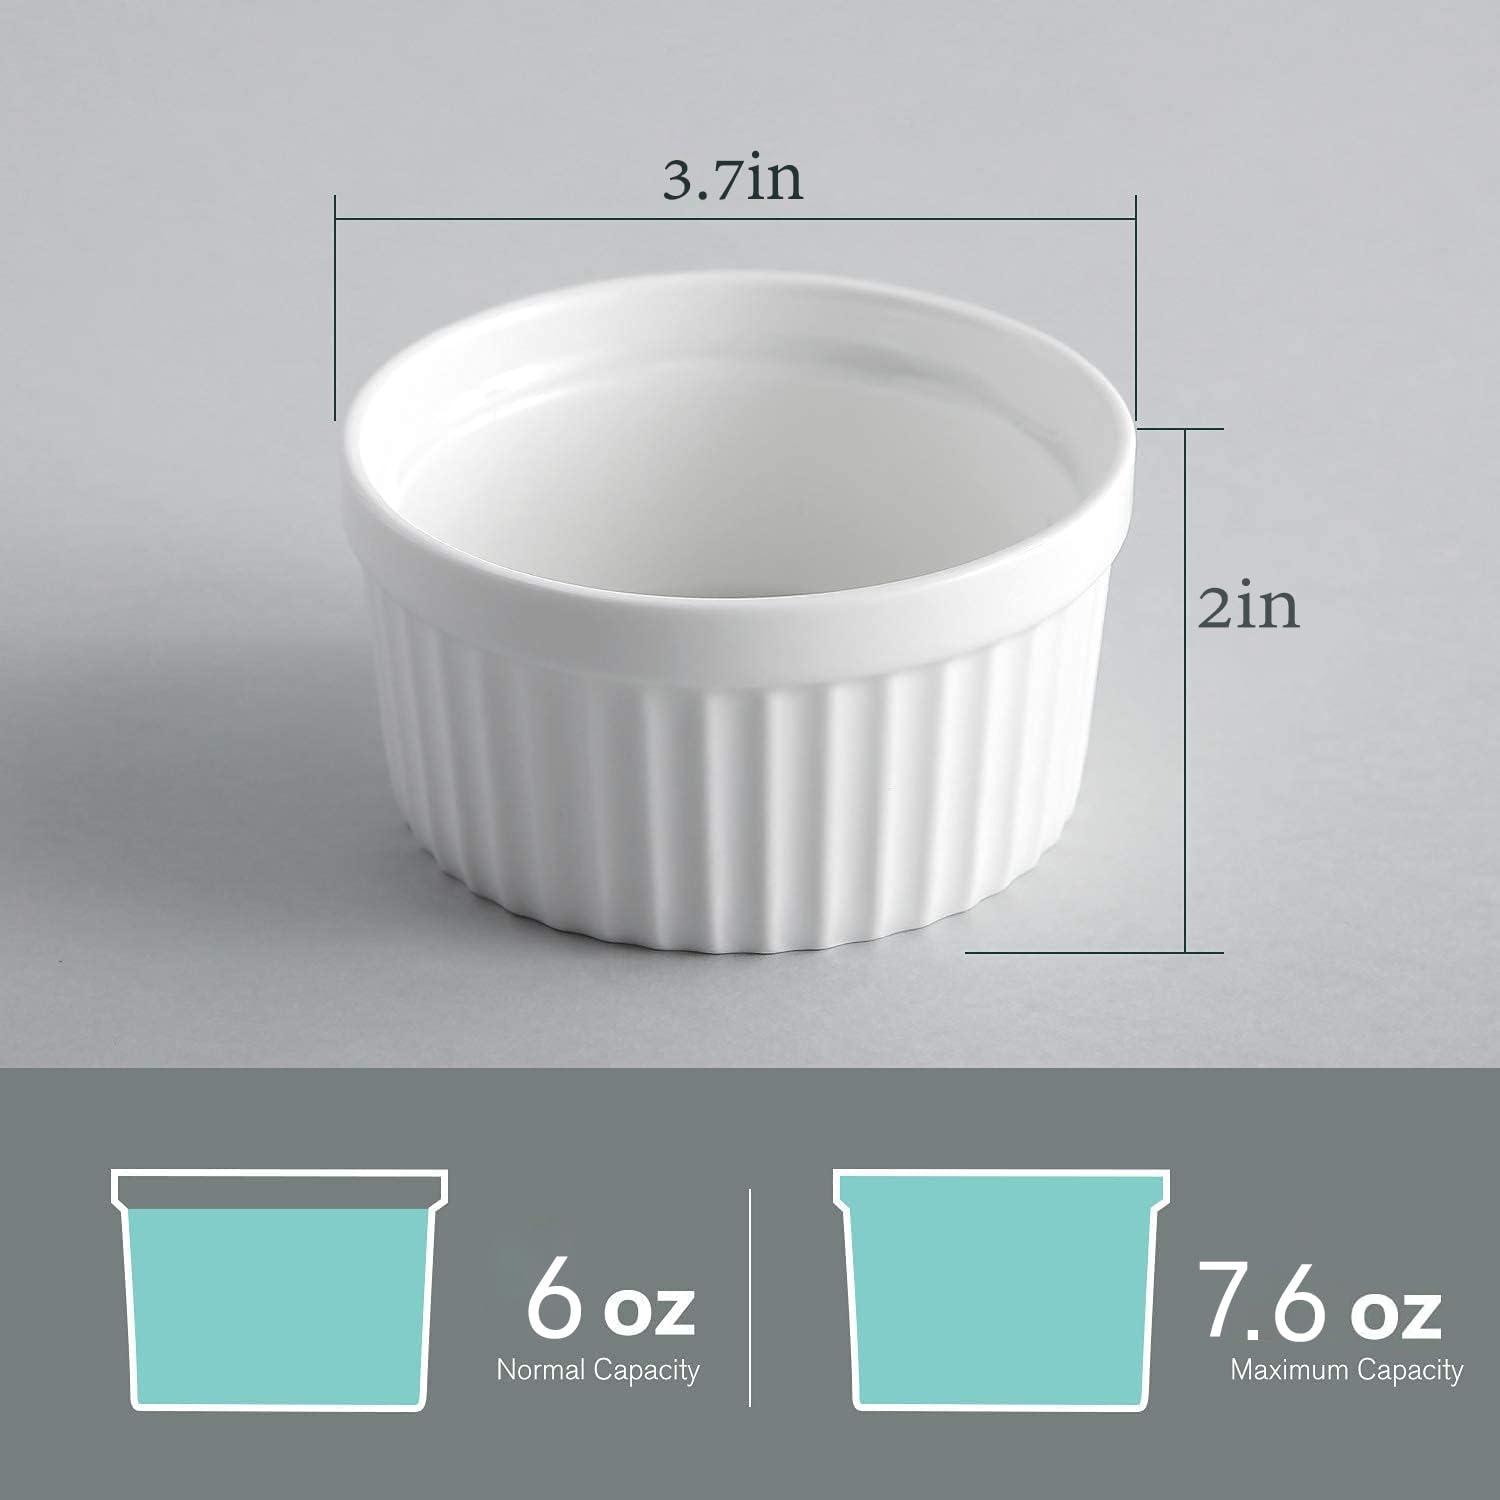 Samsle 6 oz Ramekins Set of 6, Porcelain Ramekins Dishes for Creme Brulee,Souffle, Lava Cakes, Pudding, Custard Cups for Baking and Dipping,Oven Safe, White 3.7 inch - CookCave